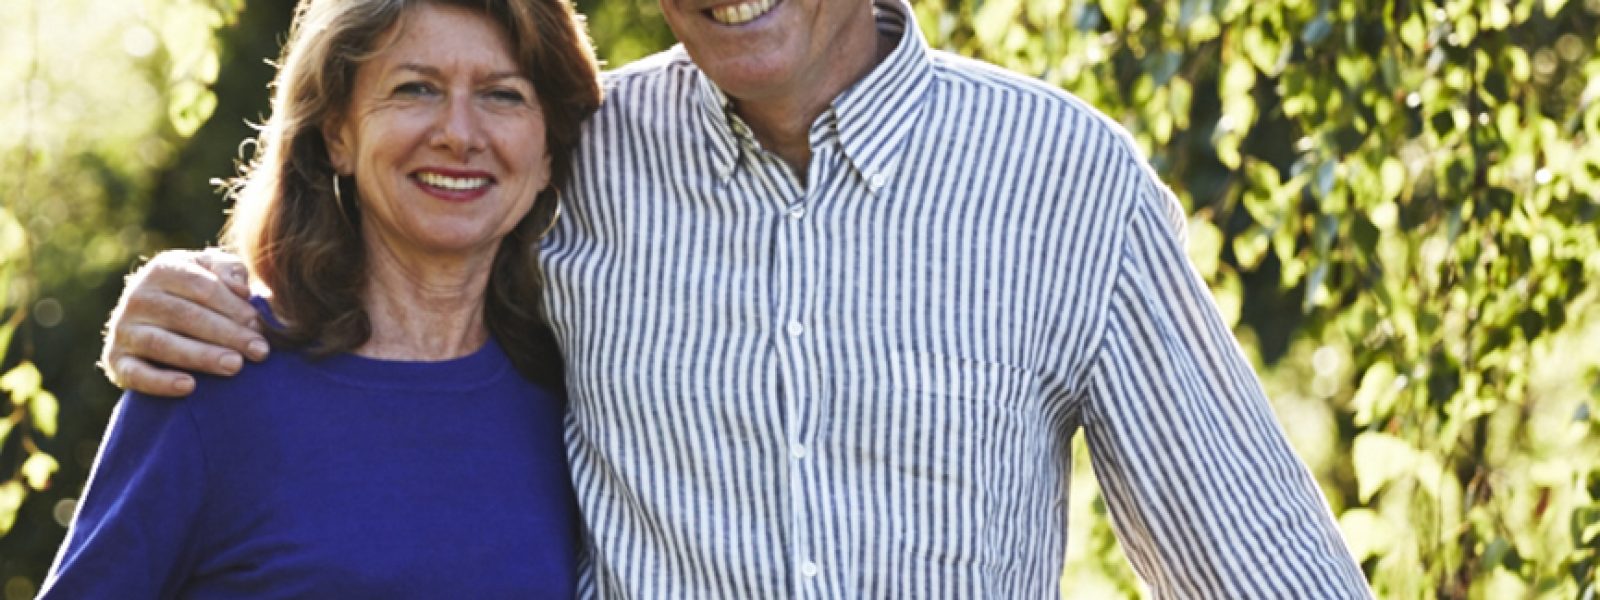 https://andrewzimmern.com/wp-content/uploads/AUTHORS-Jean-Pierre-and-Denise-Moulle-1600x600.jpg